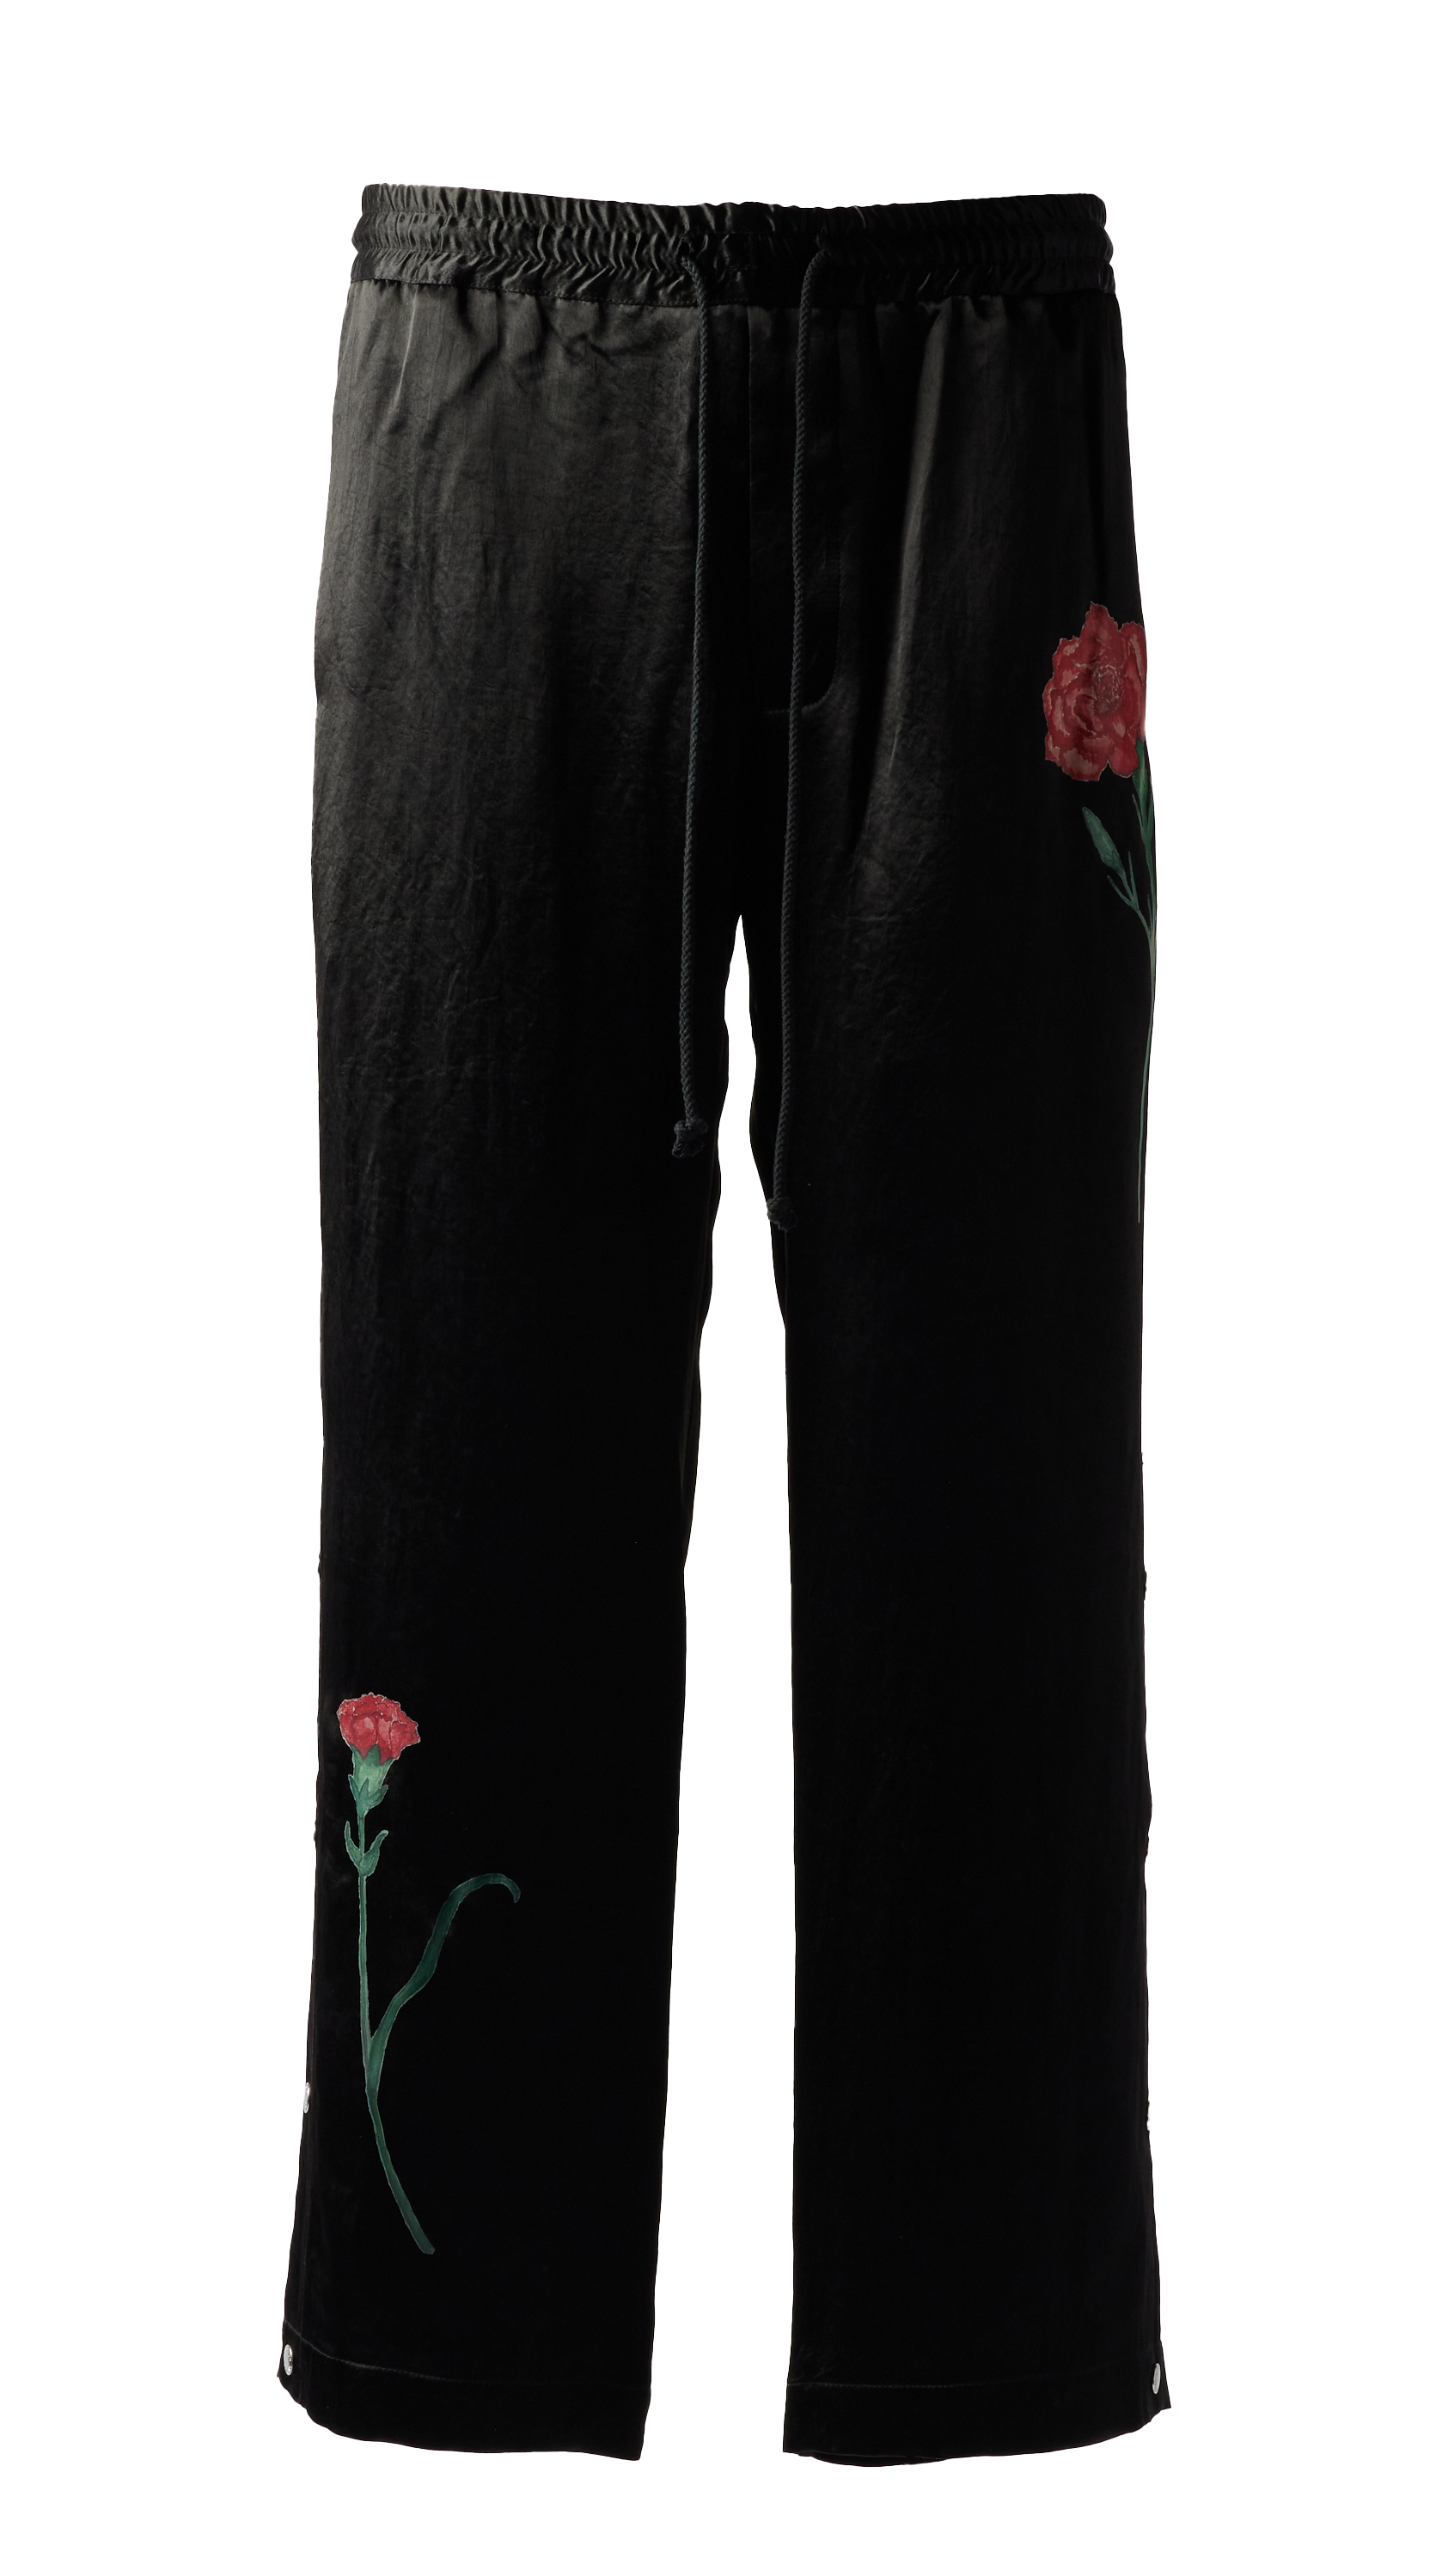 SONG FOR THE MUTE - Falling Flowers Track Pant product image